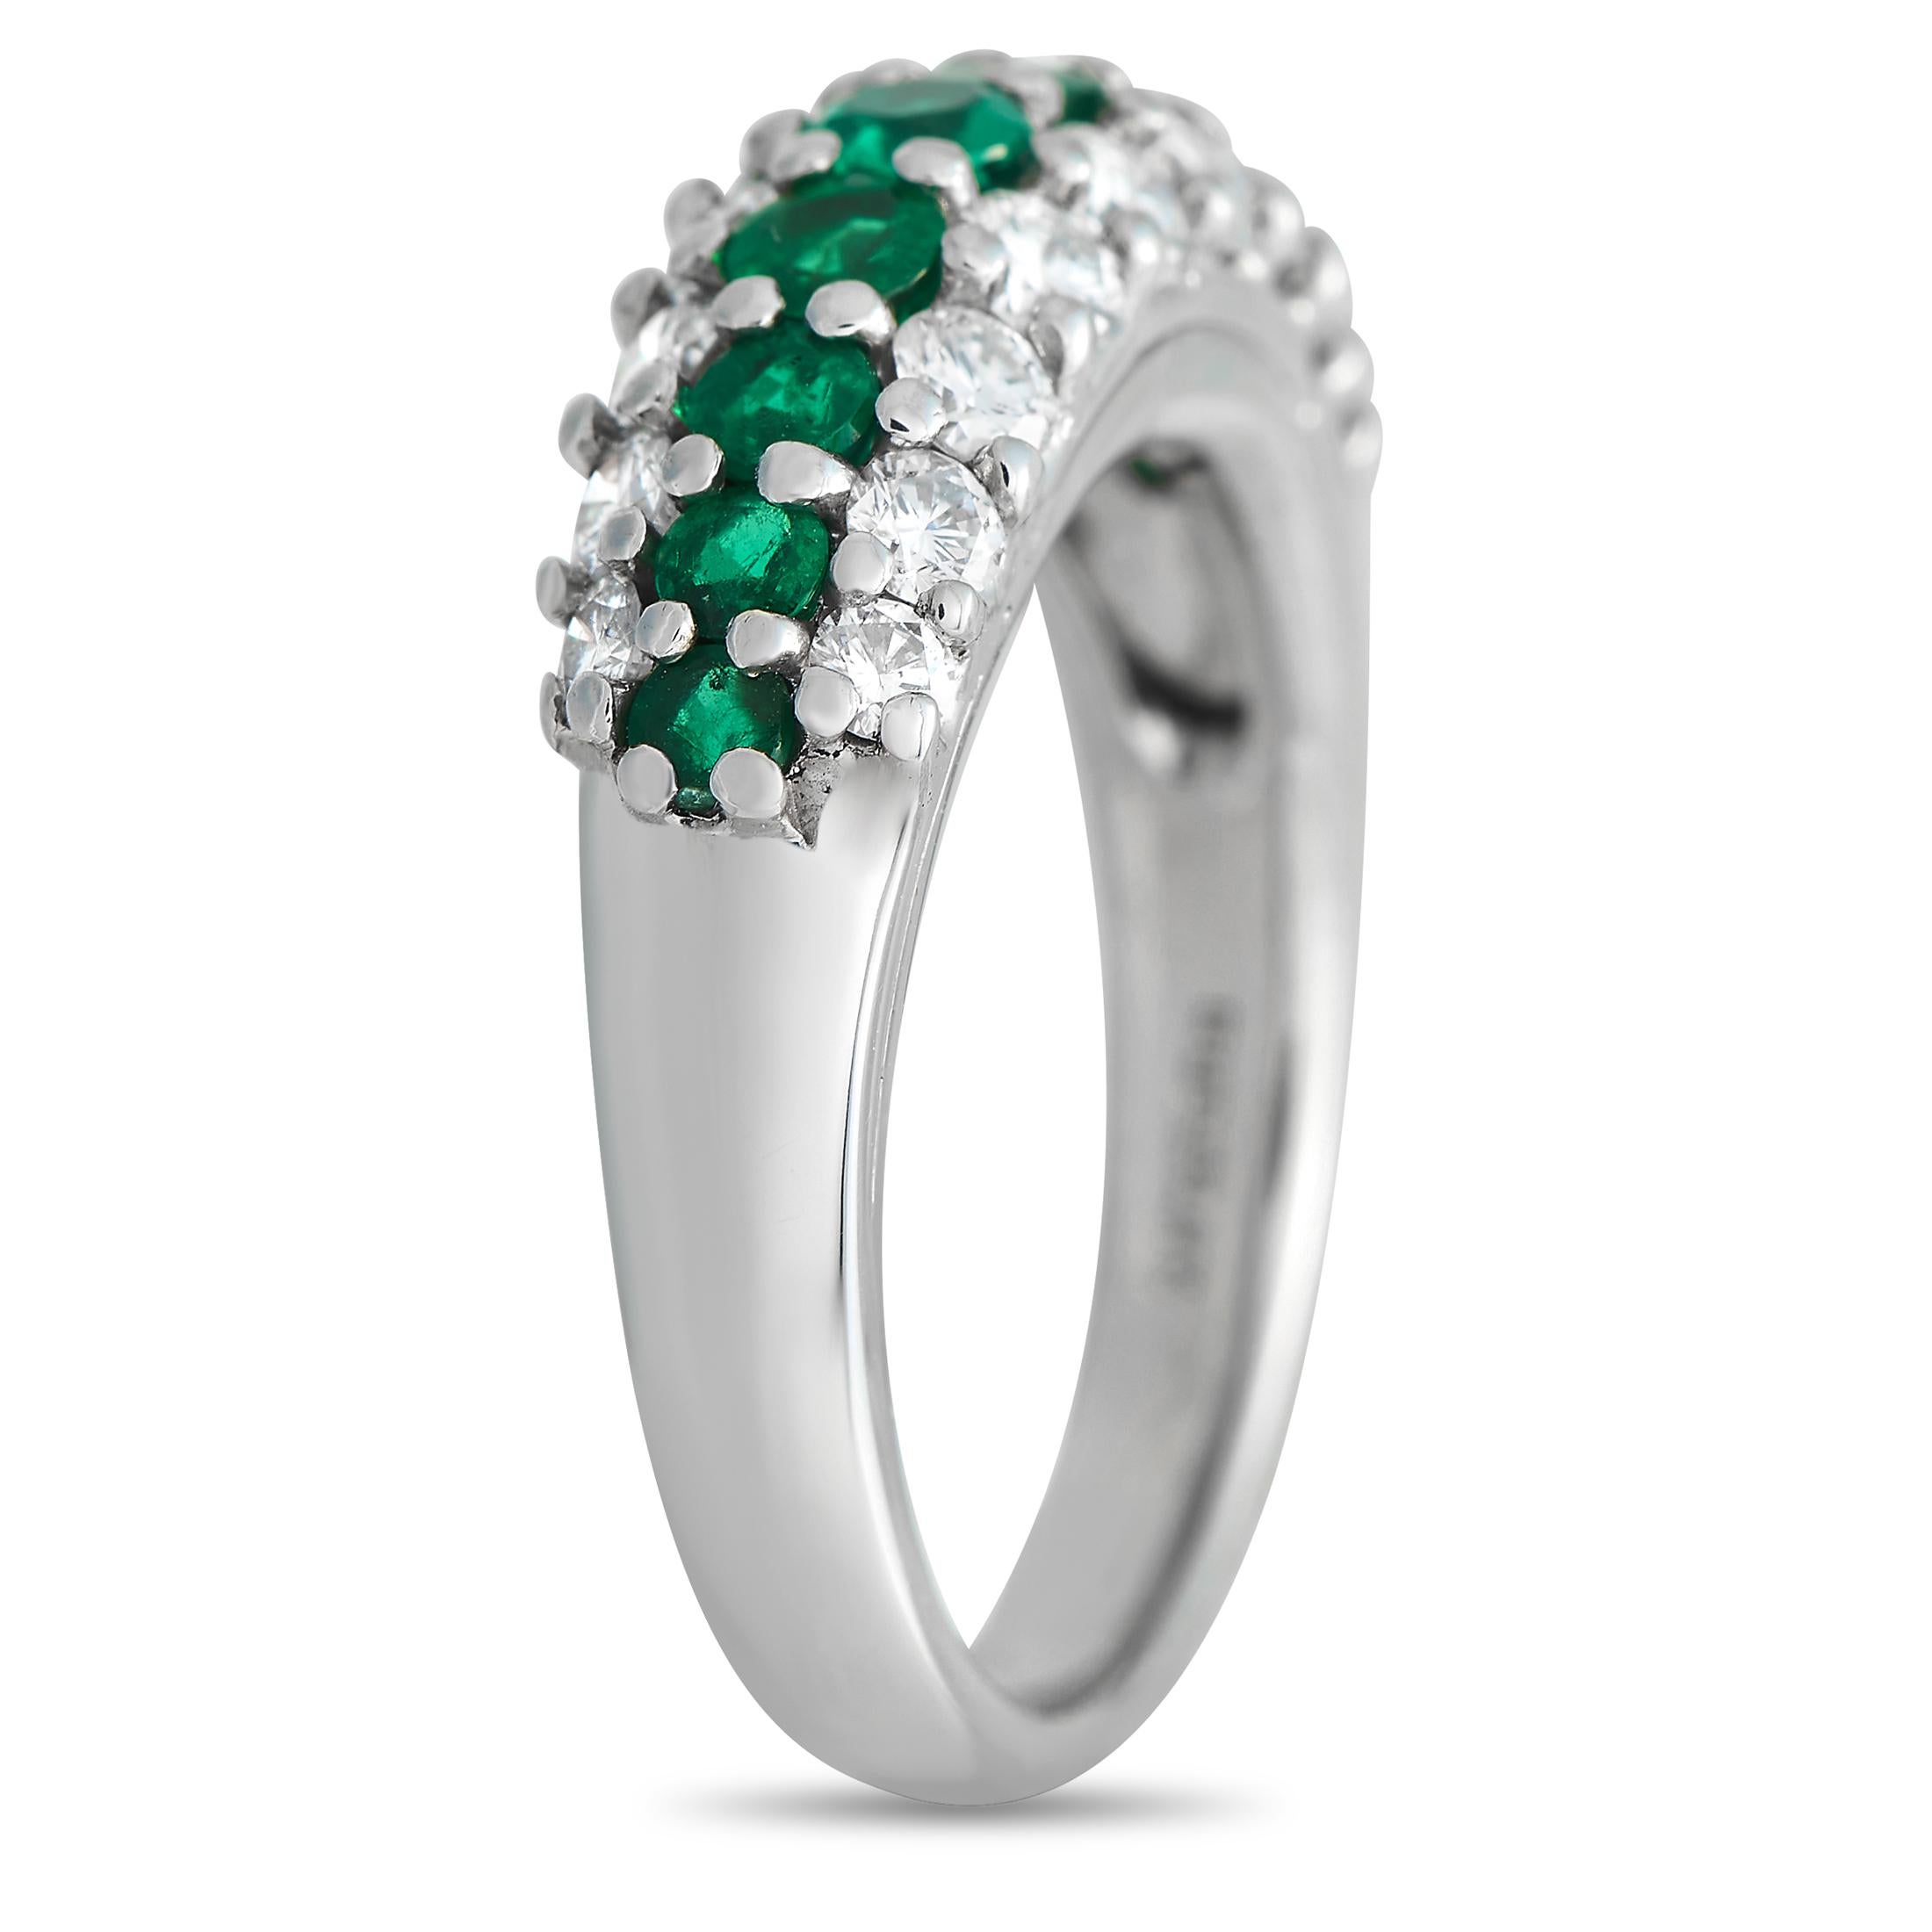 Here is a gorgeous ring ready to bring the perfect amount of color and shine to your elegant looks. This Tiffany & Co. piece has a polished band crafted in solid platinum. It comes embellished with a row of emerald gemstones in tapering sizes, set